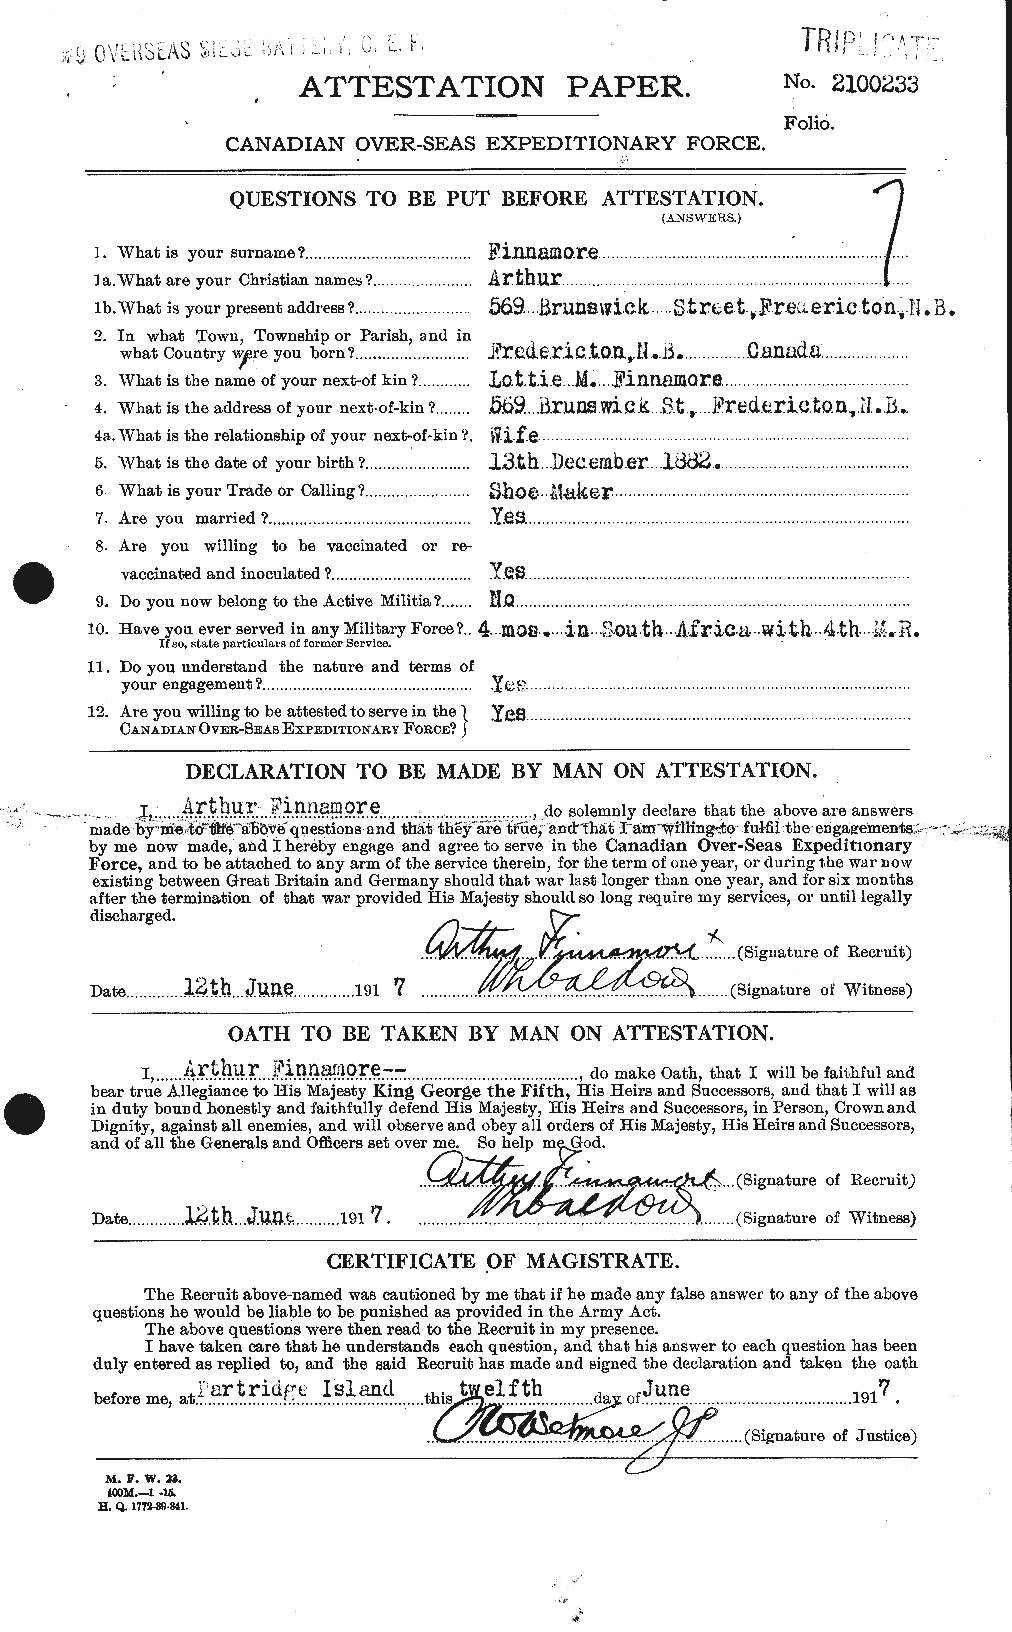 Personnel Records of the First World War - CEF 328535a